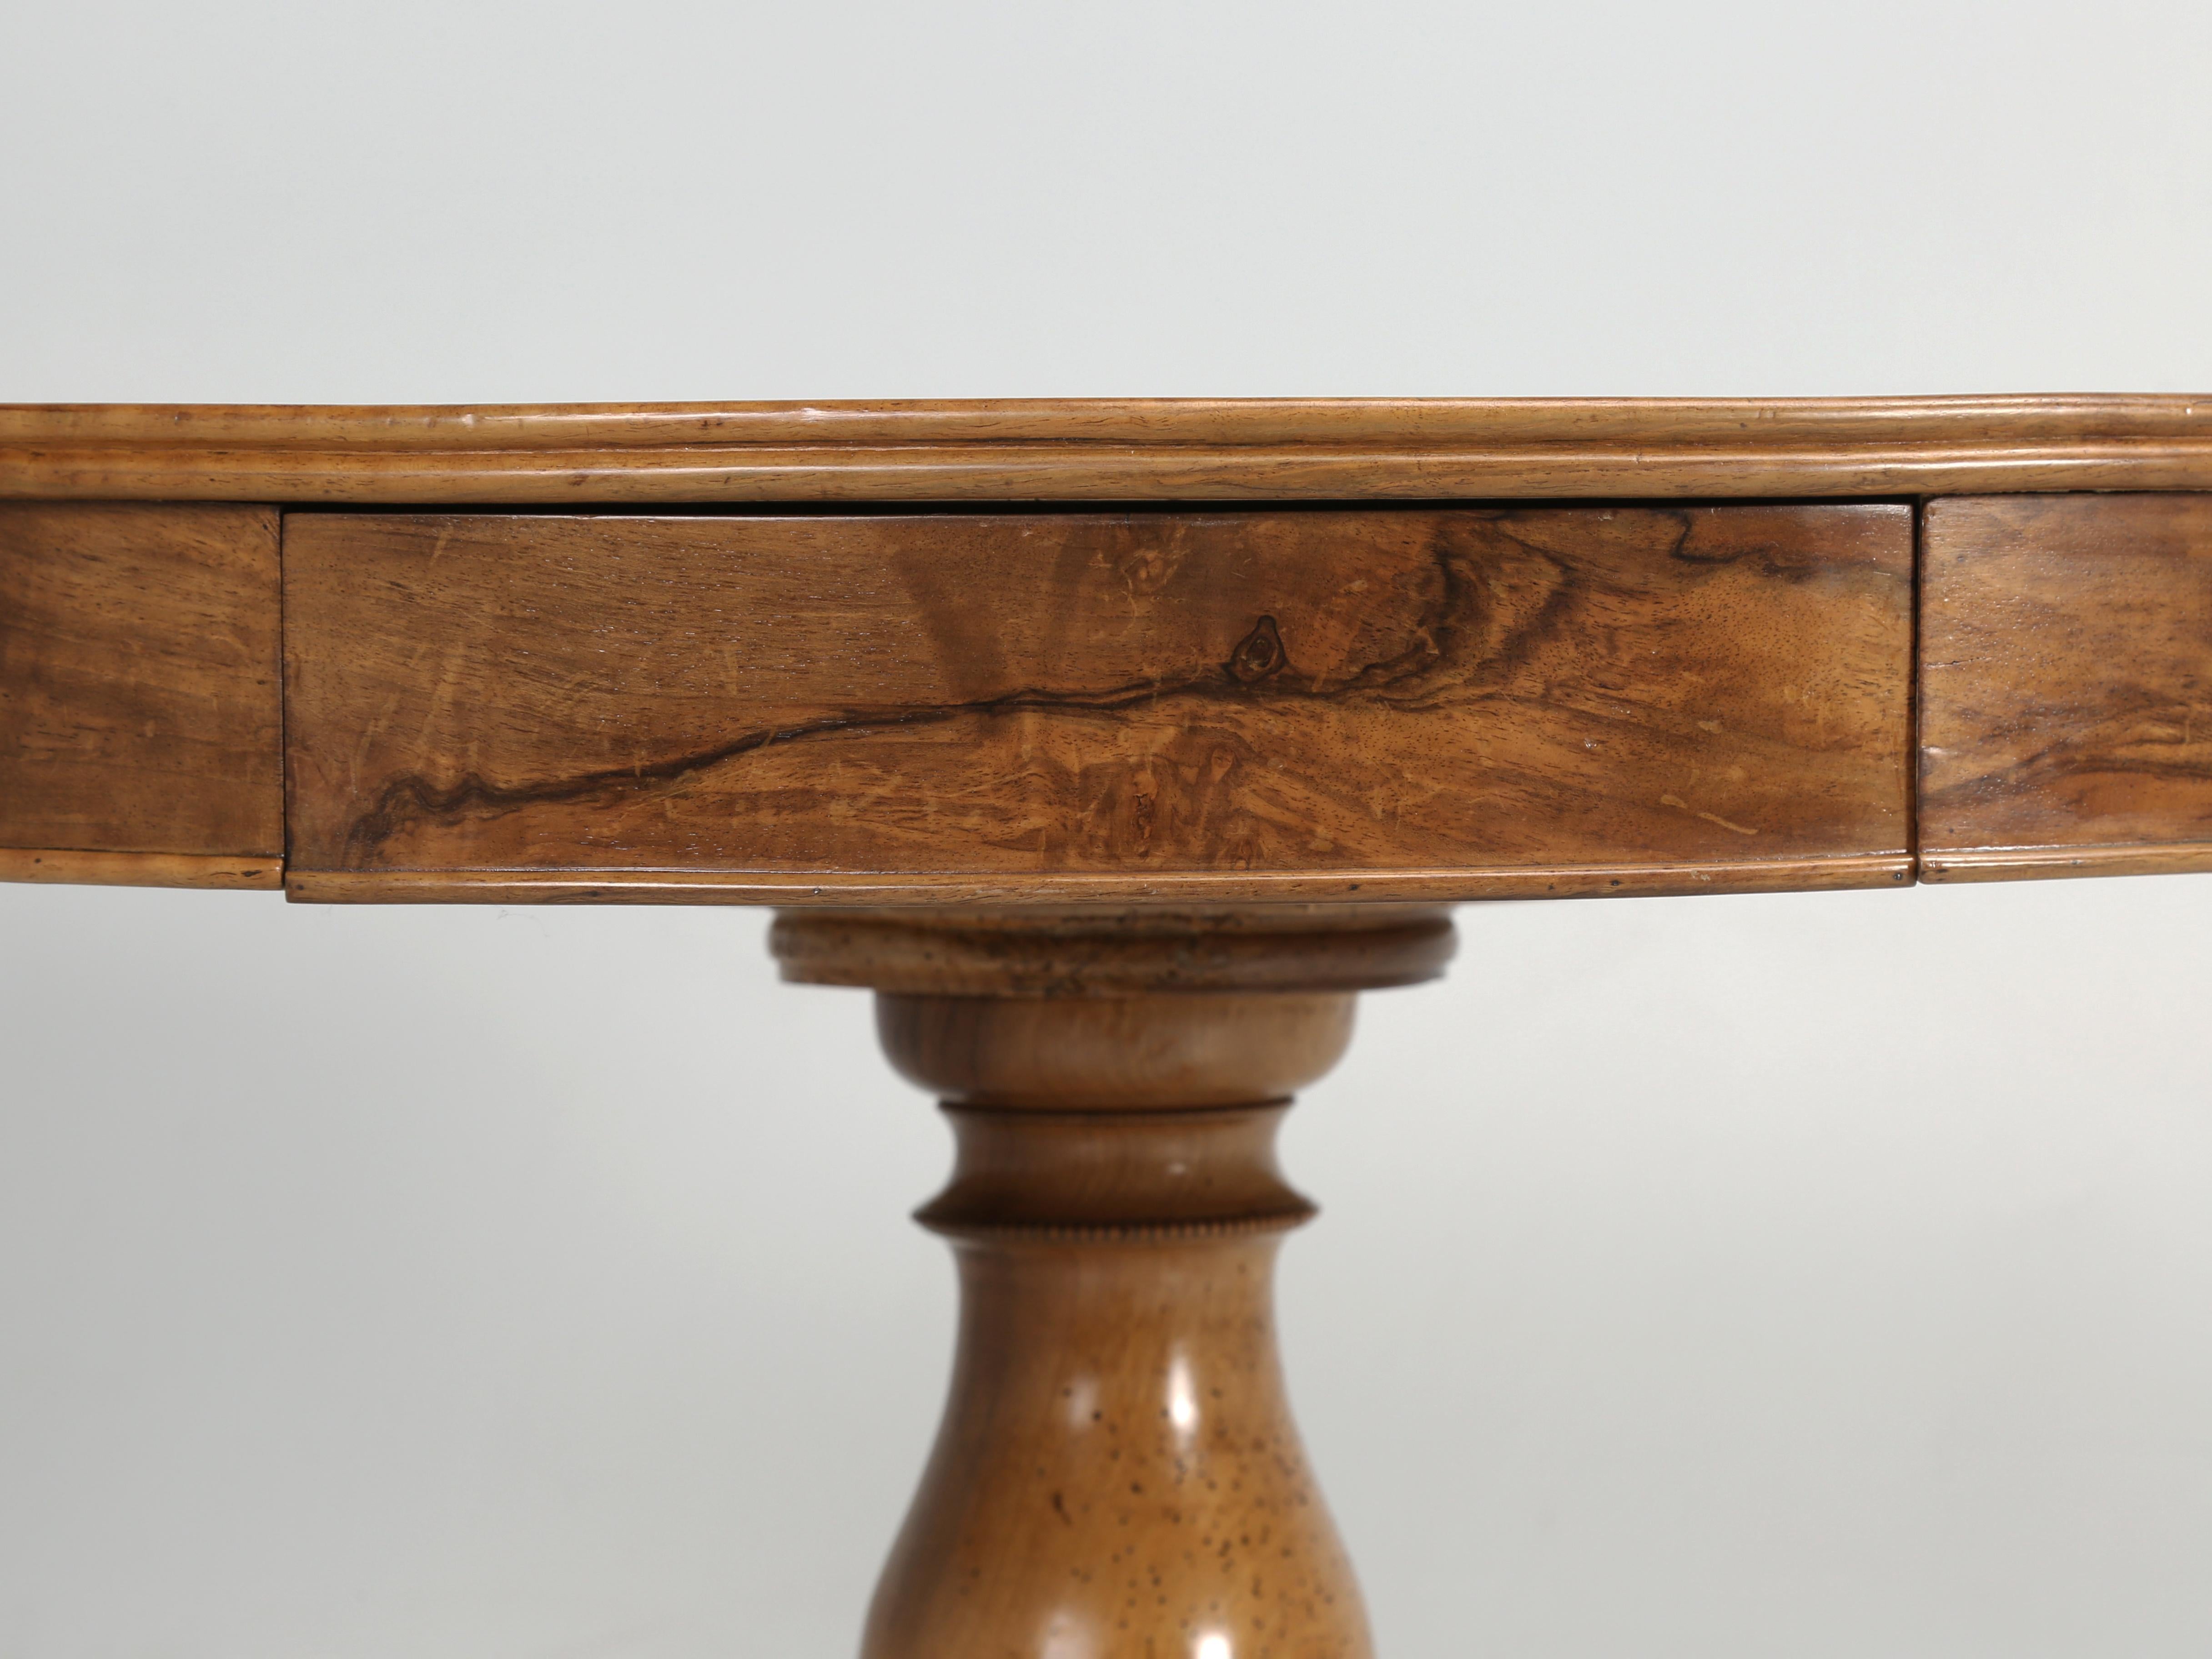 Antique French Center Hall Table in Crotch Walnut with French Polish Finish For Sale 5